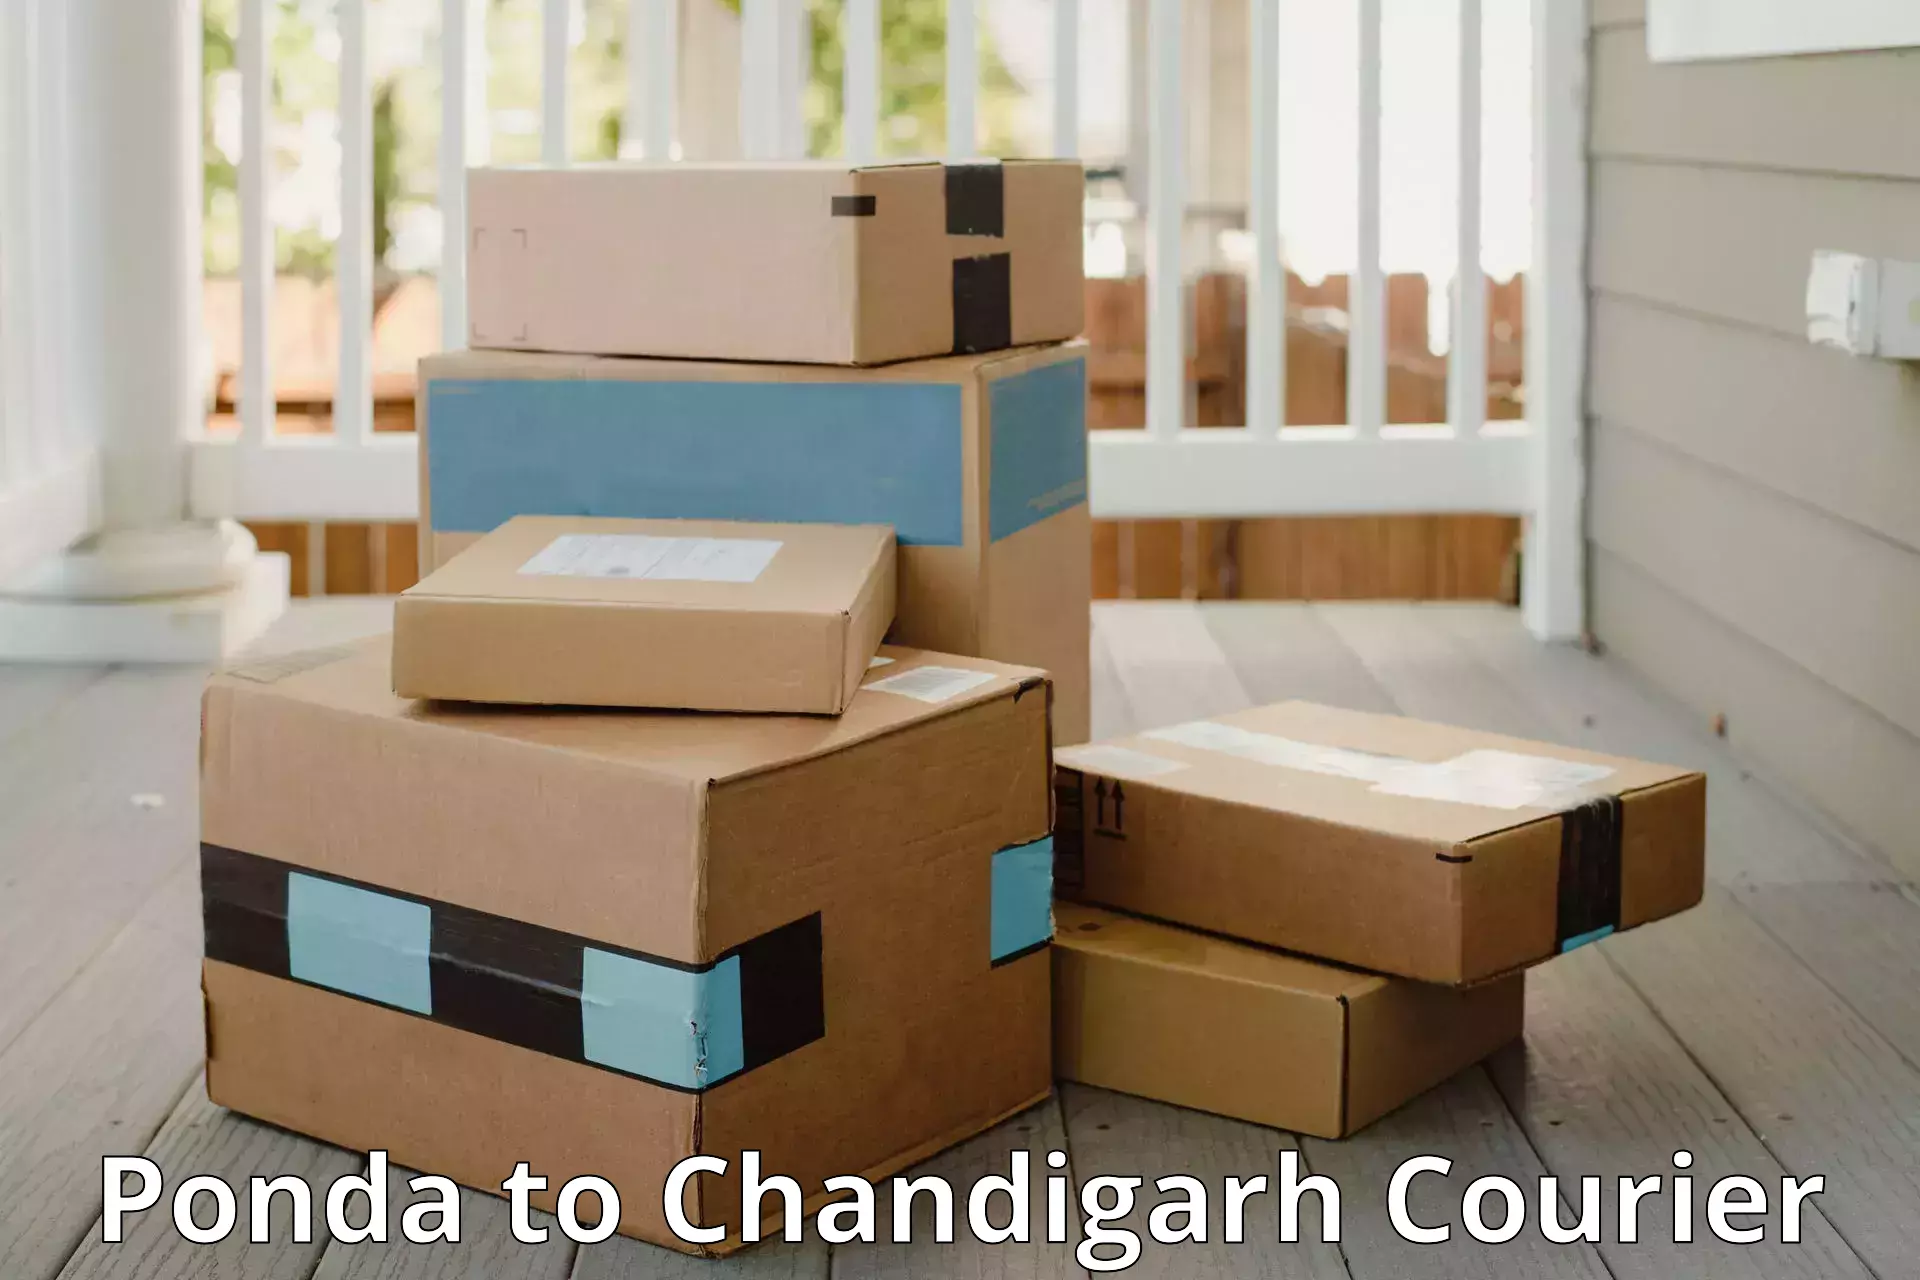 Luggage delivery network Ponda to Chandigarh